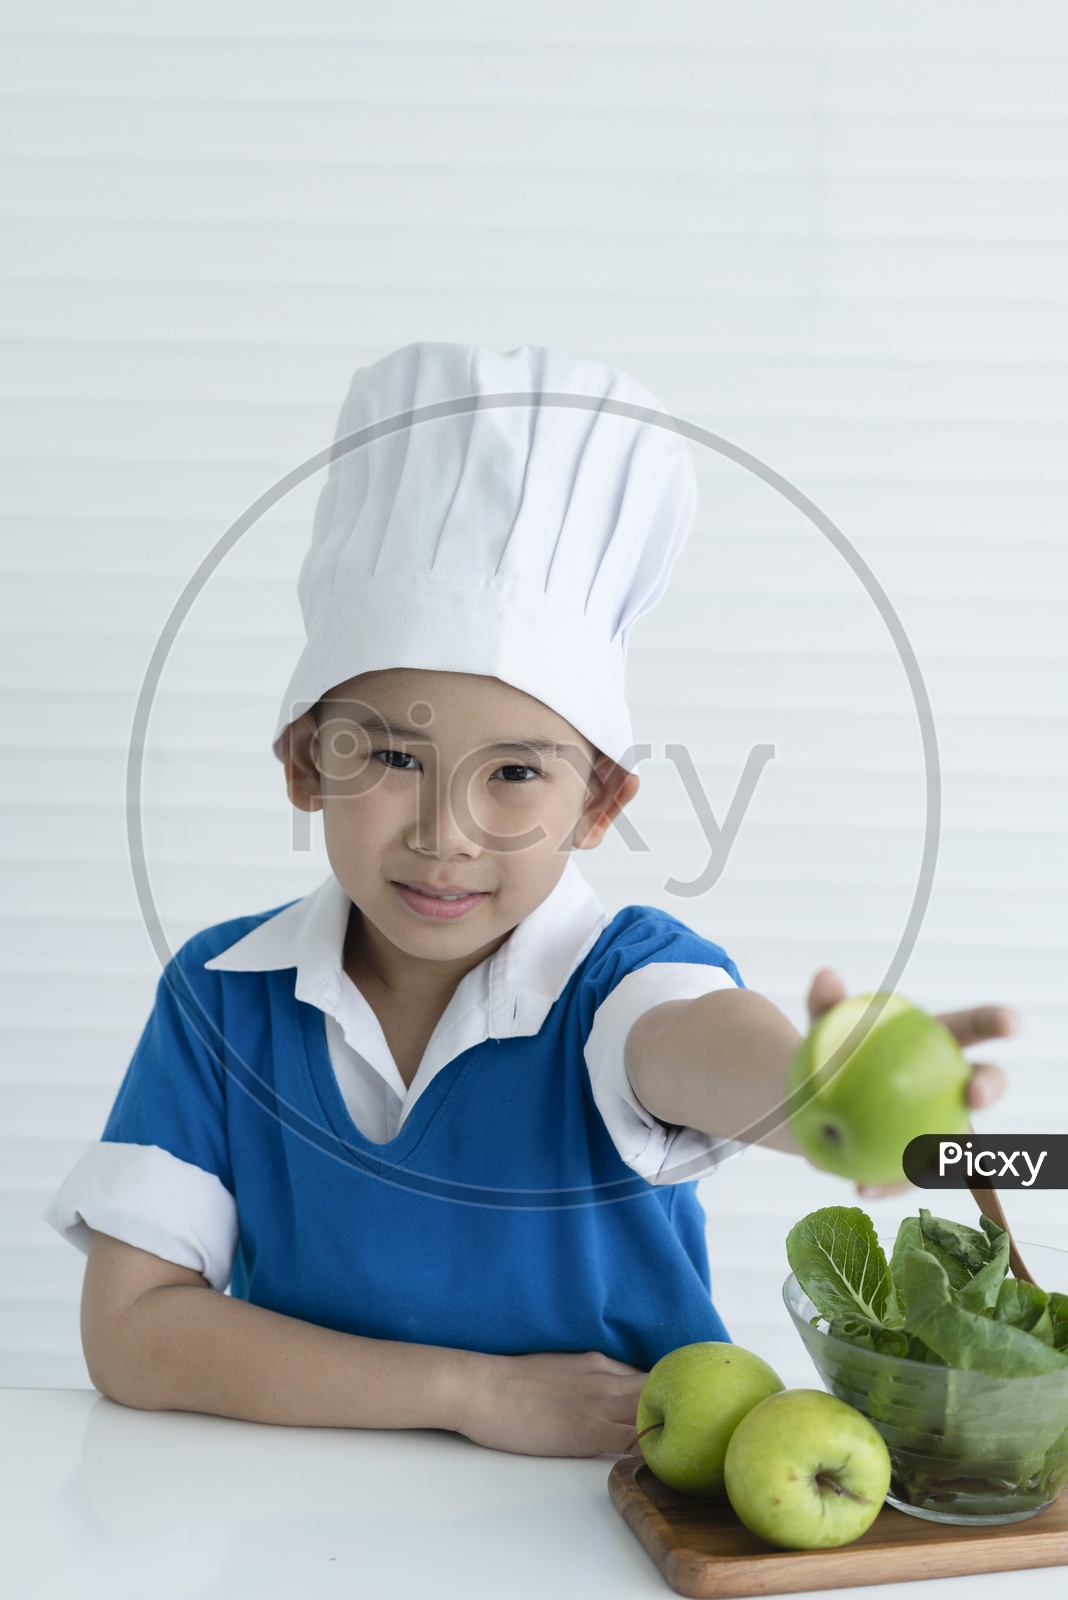 Boy as chef enjoying cooking with green apple in hand